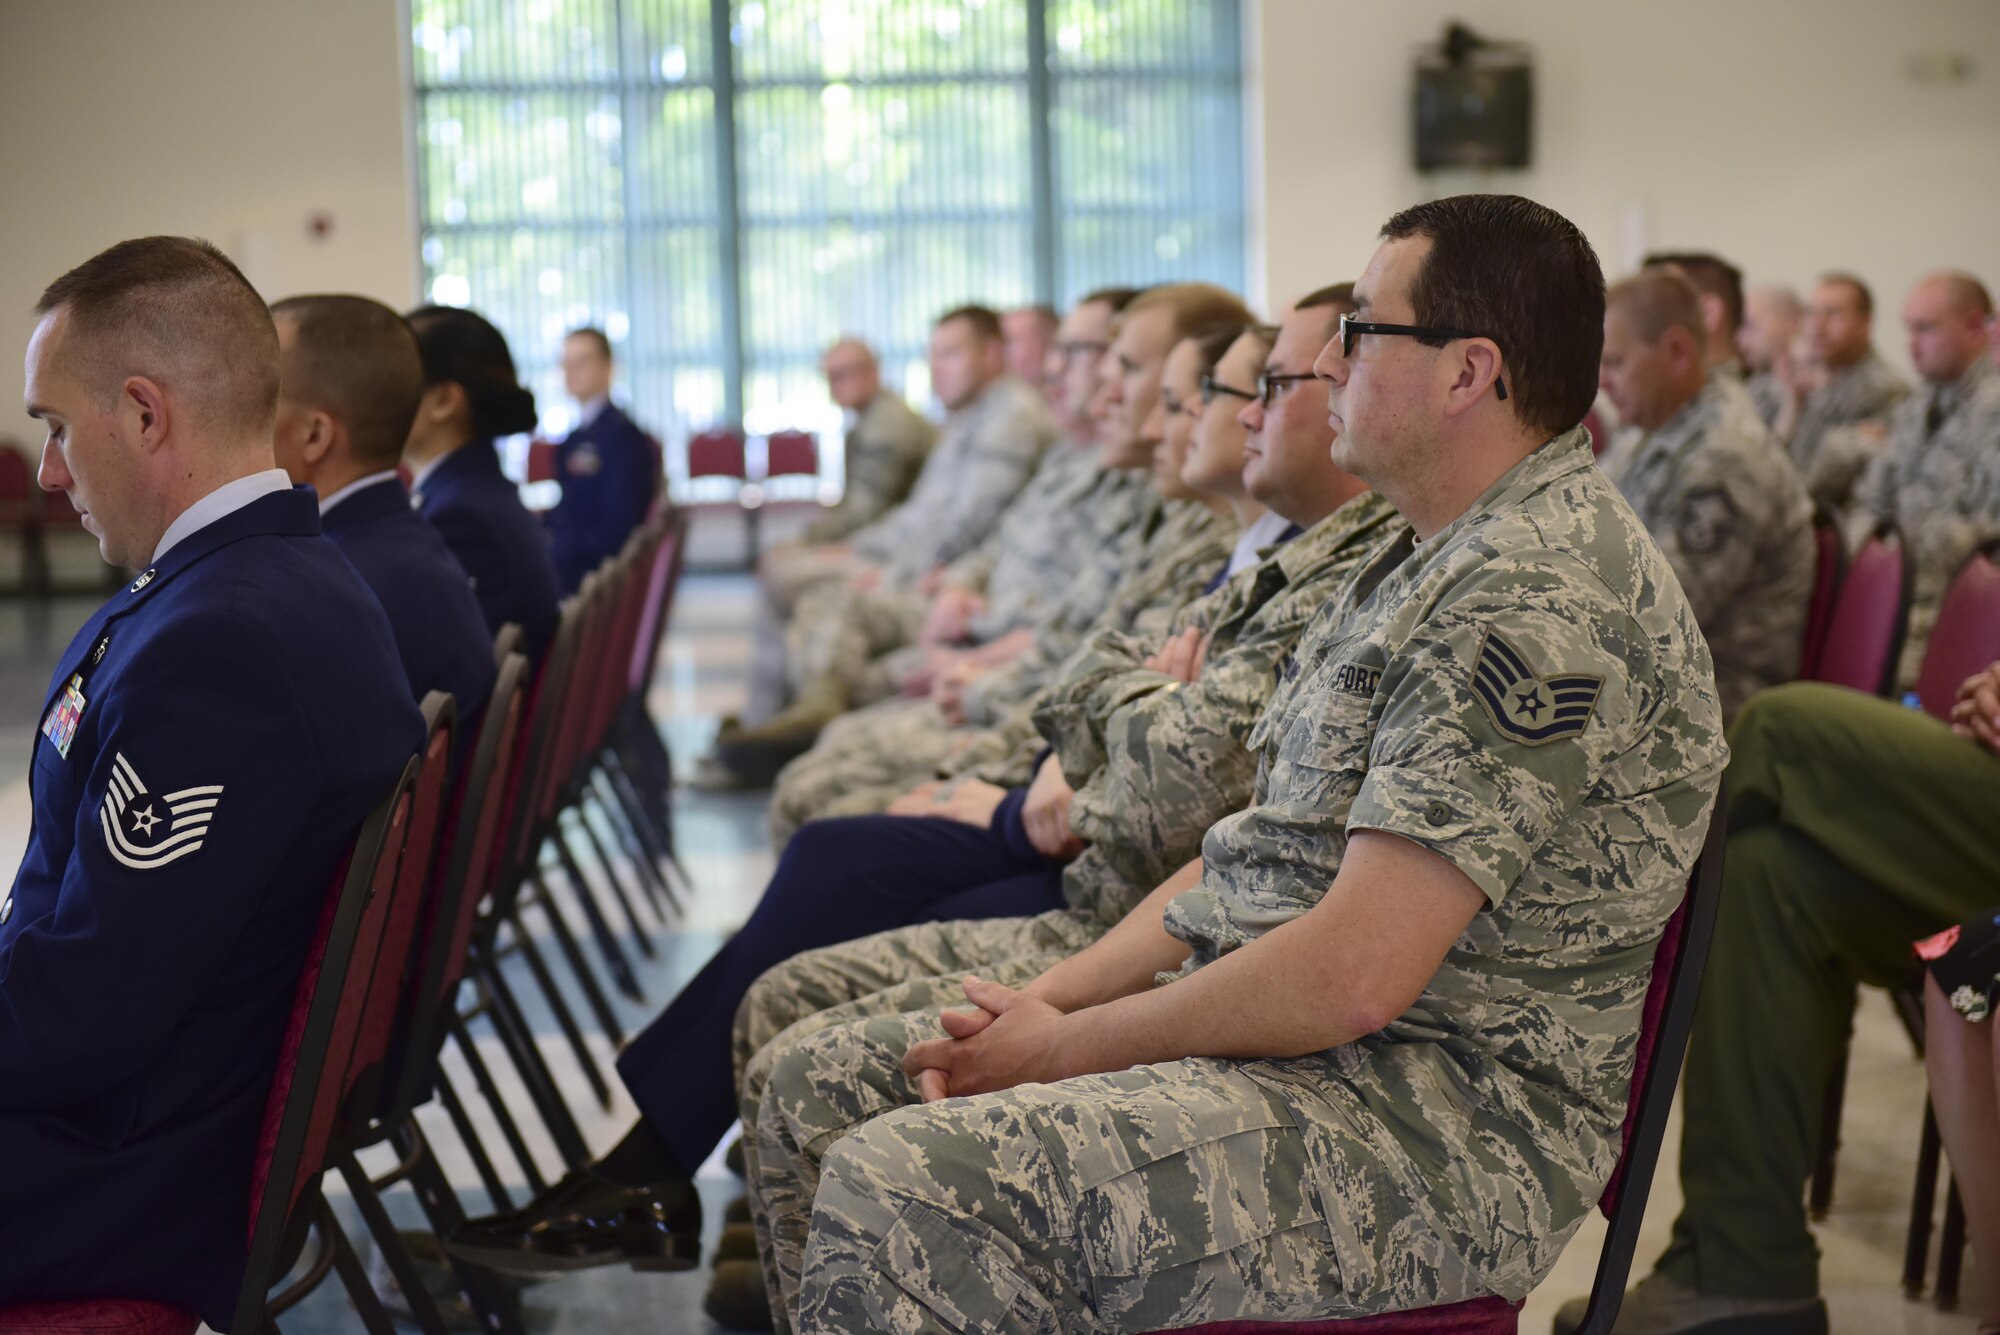 Airmen of the 109th Airlift Wing were recognized during the first Non-Commissioned Officer induction ceremony held at Stratton Air National Guard Base, Scotia, New York on June 3, 2017.  The induction ceremony recognizes Airmen who were promoted to staff sergeant between May 1, 2016 and May 15, 2017.  (U.S. Air National Guard photo by Staff Sgt. Benjamin German/Released)